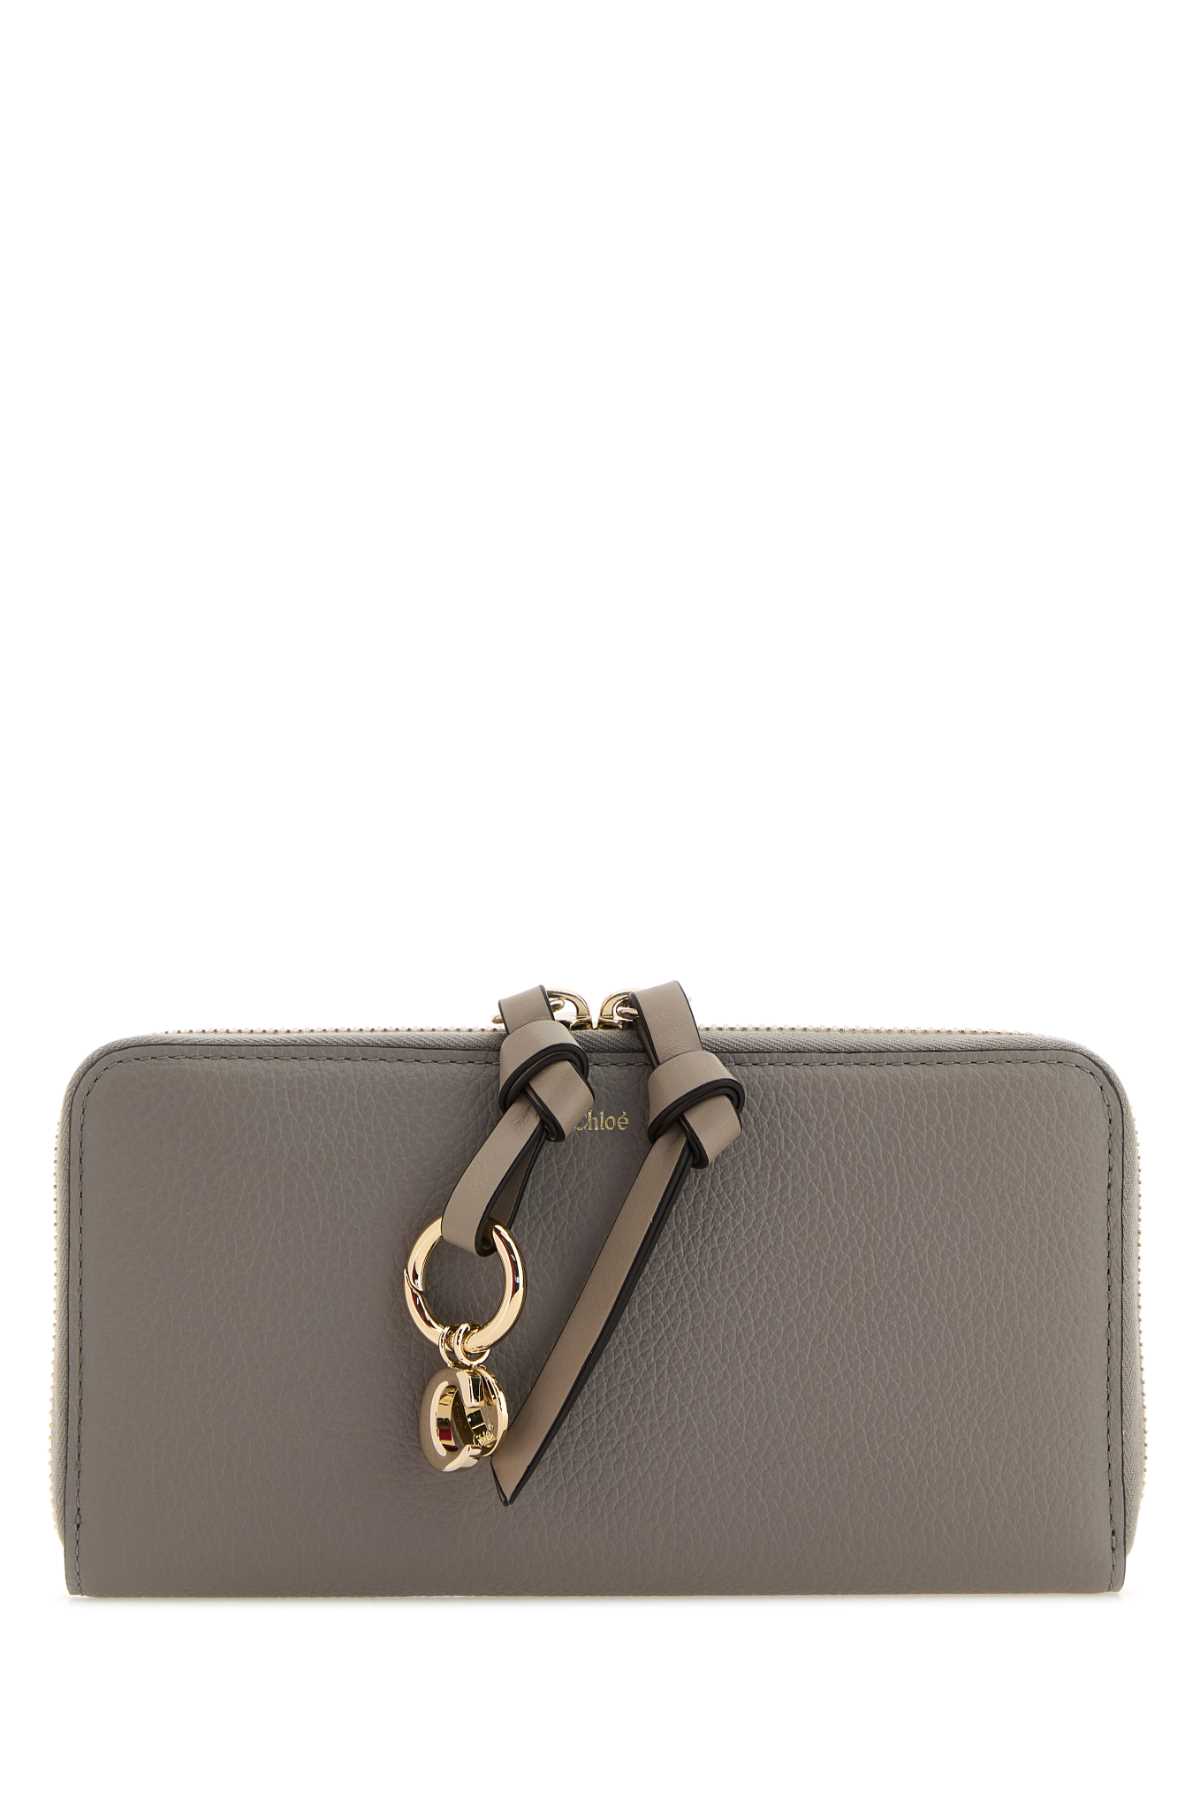 Chloé Dove Grey Leather Wallet In 053